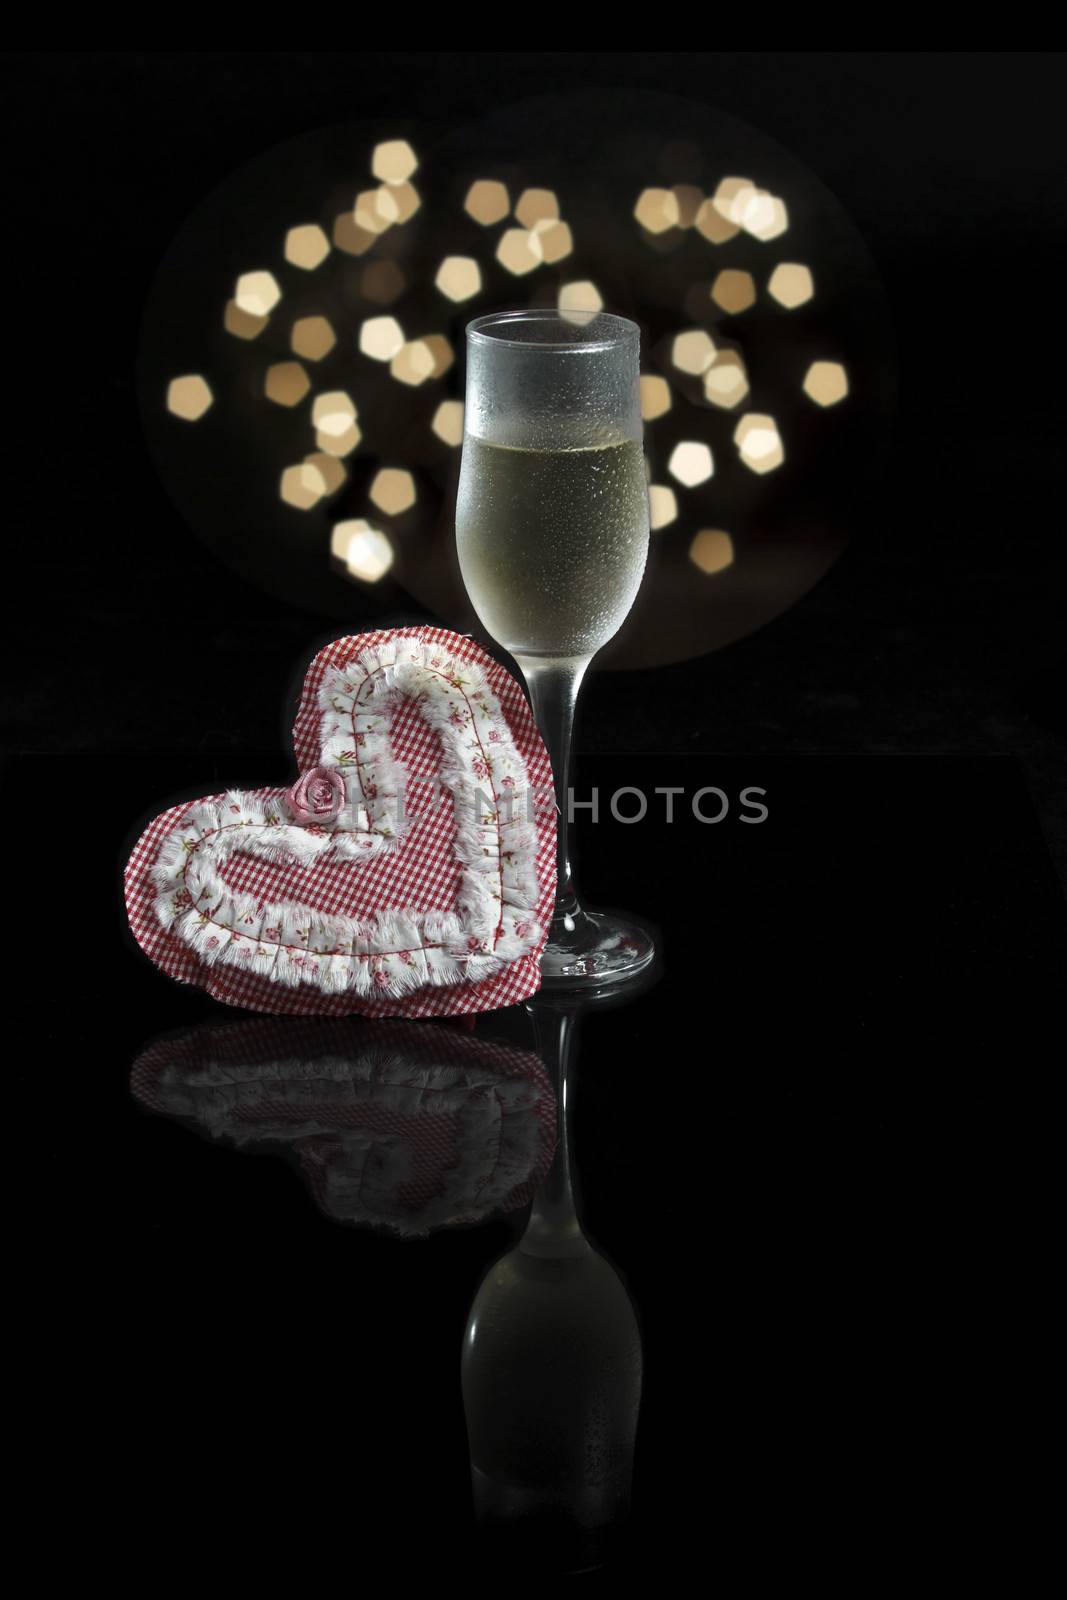 A glass of champagne, a heart made in patchwork and Christmas Lights on a black background